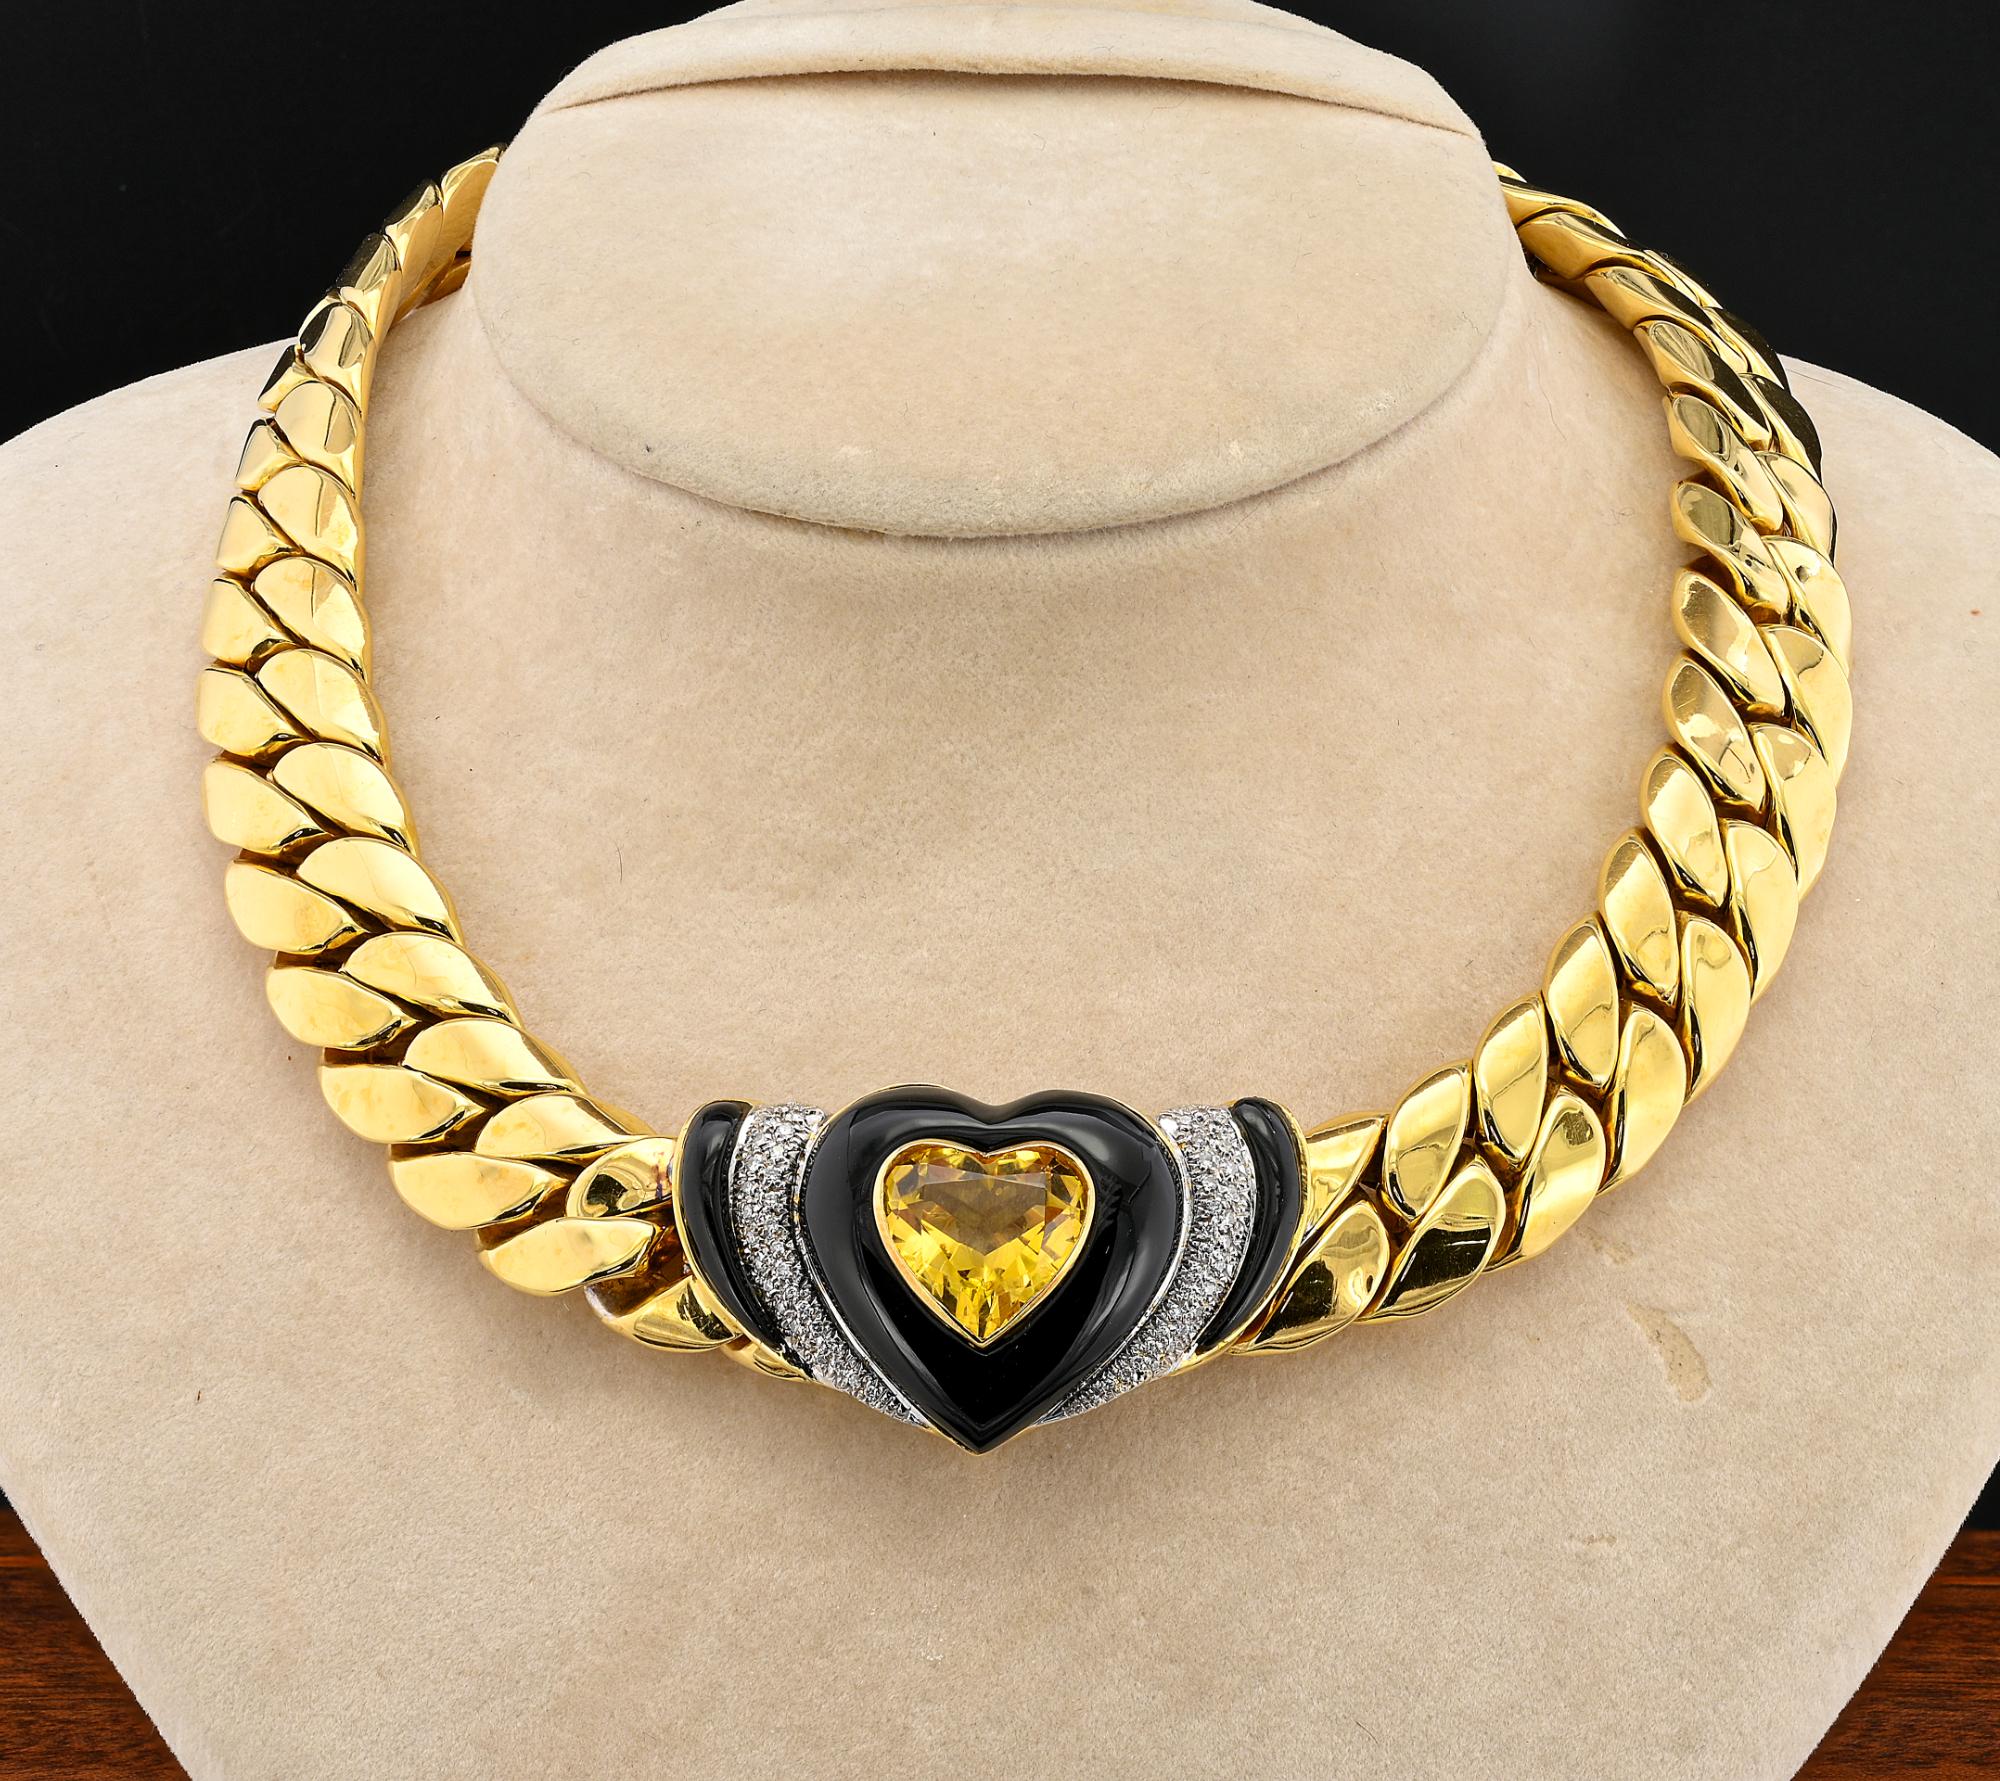 This fascinating estate Italian necklace is a striking example dating 1975 circa
Entirely made of solid 18 KT gold
Large Cuban links chain leading to a superb centre styled with a heart cut natural Citrine of lovely honey gold color nestled in a